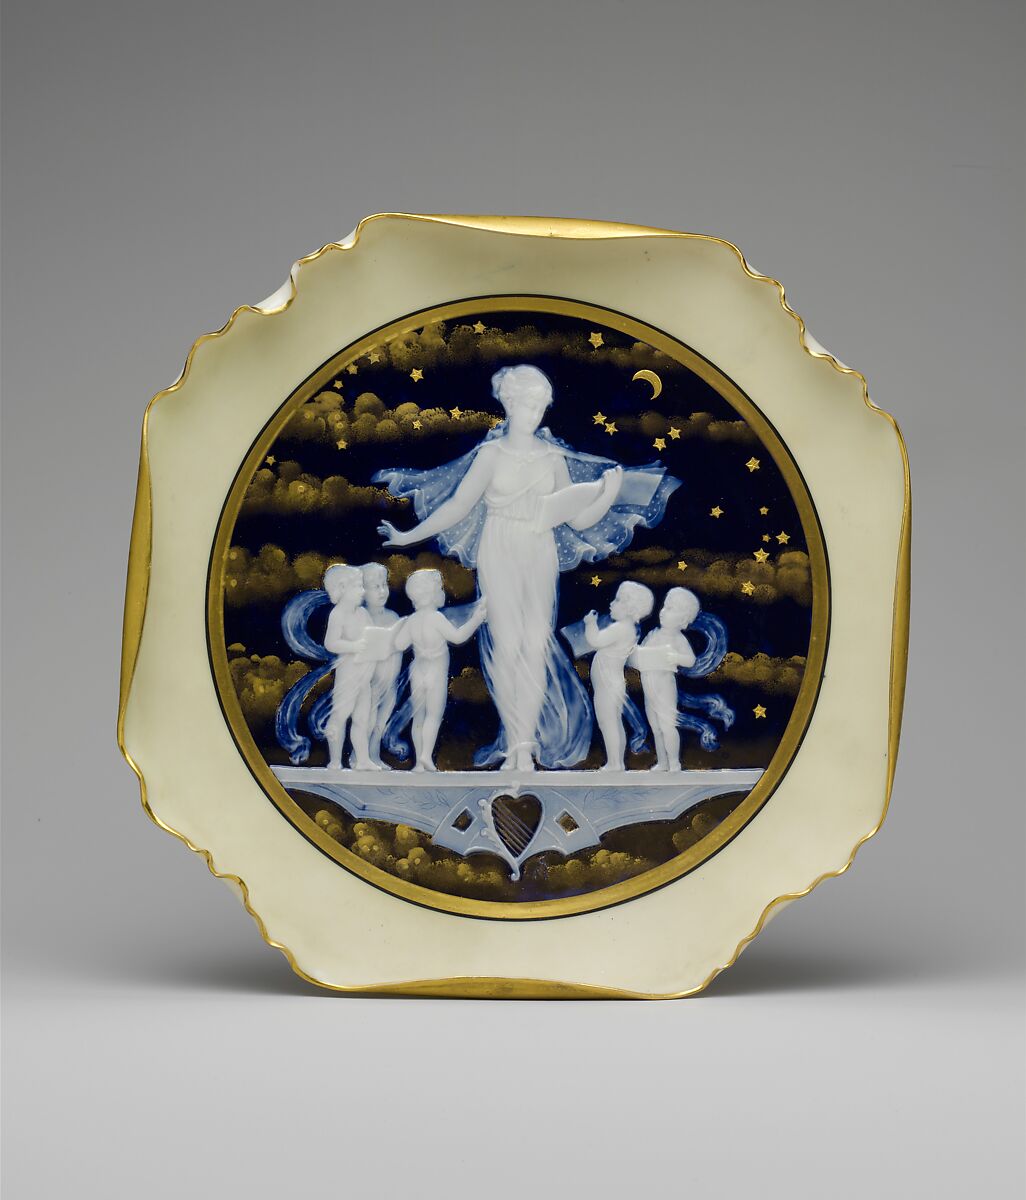 Plaque, Ott and Brewer (American, Trenton, New Jersey, 1871–1893), Porcelain, American 